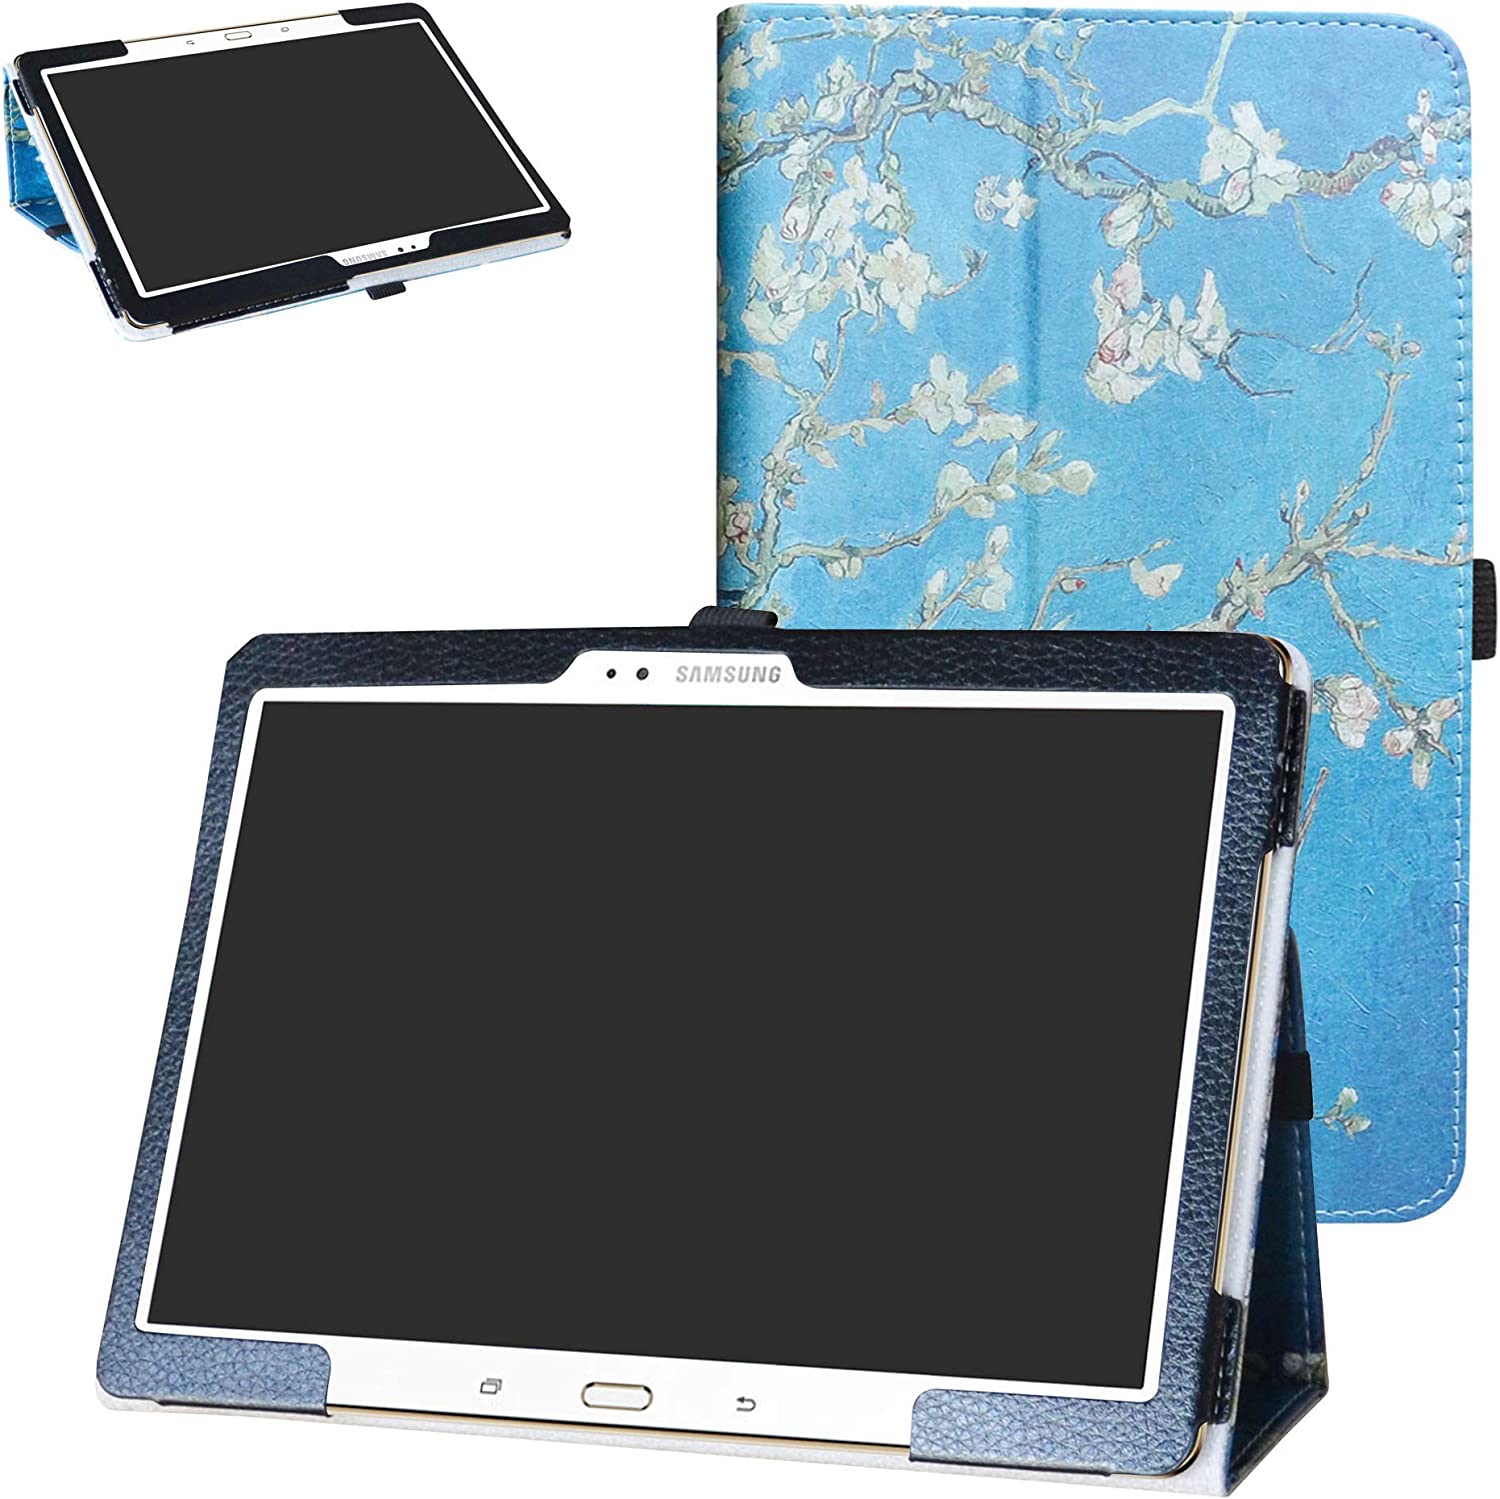 Samsung Tab S 10.5 T800 Case, PU Leather Folio 2-Folding Stand Cover for 10.5" Samsung Galaxy Tab S 10.5